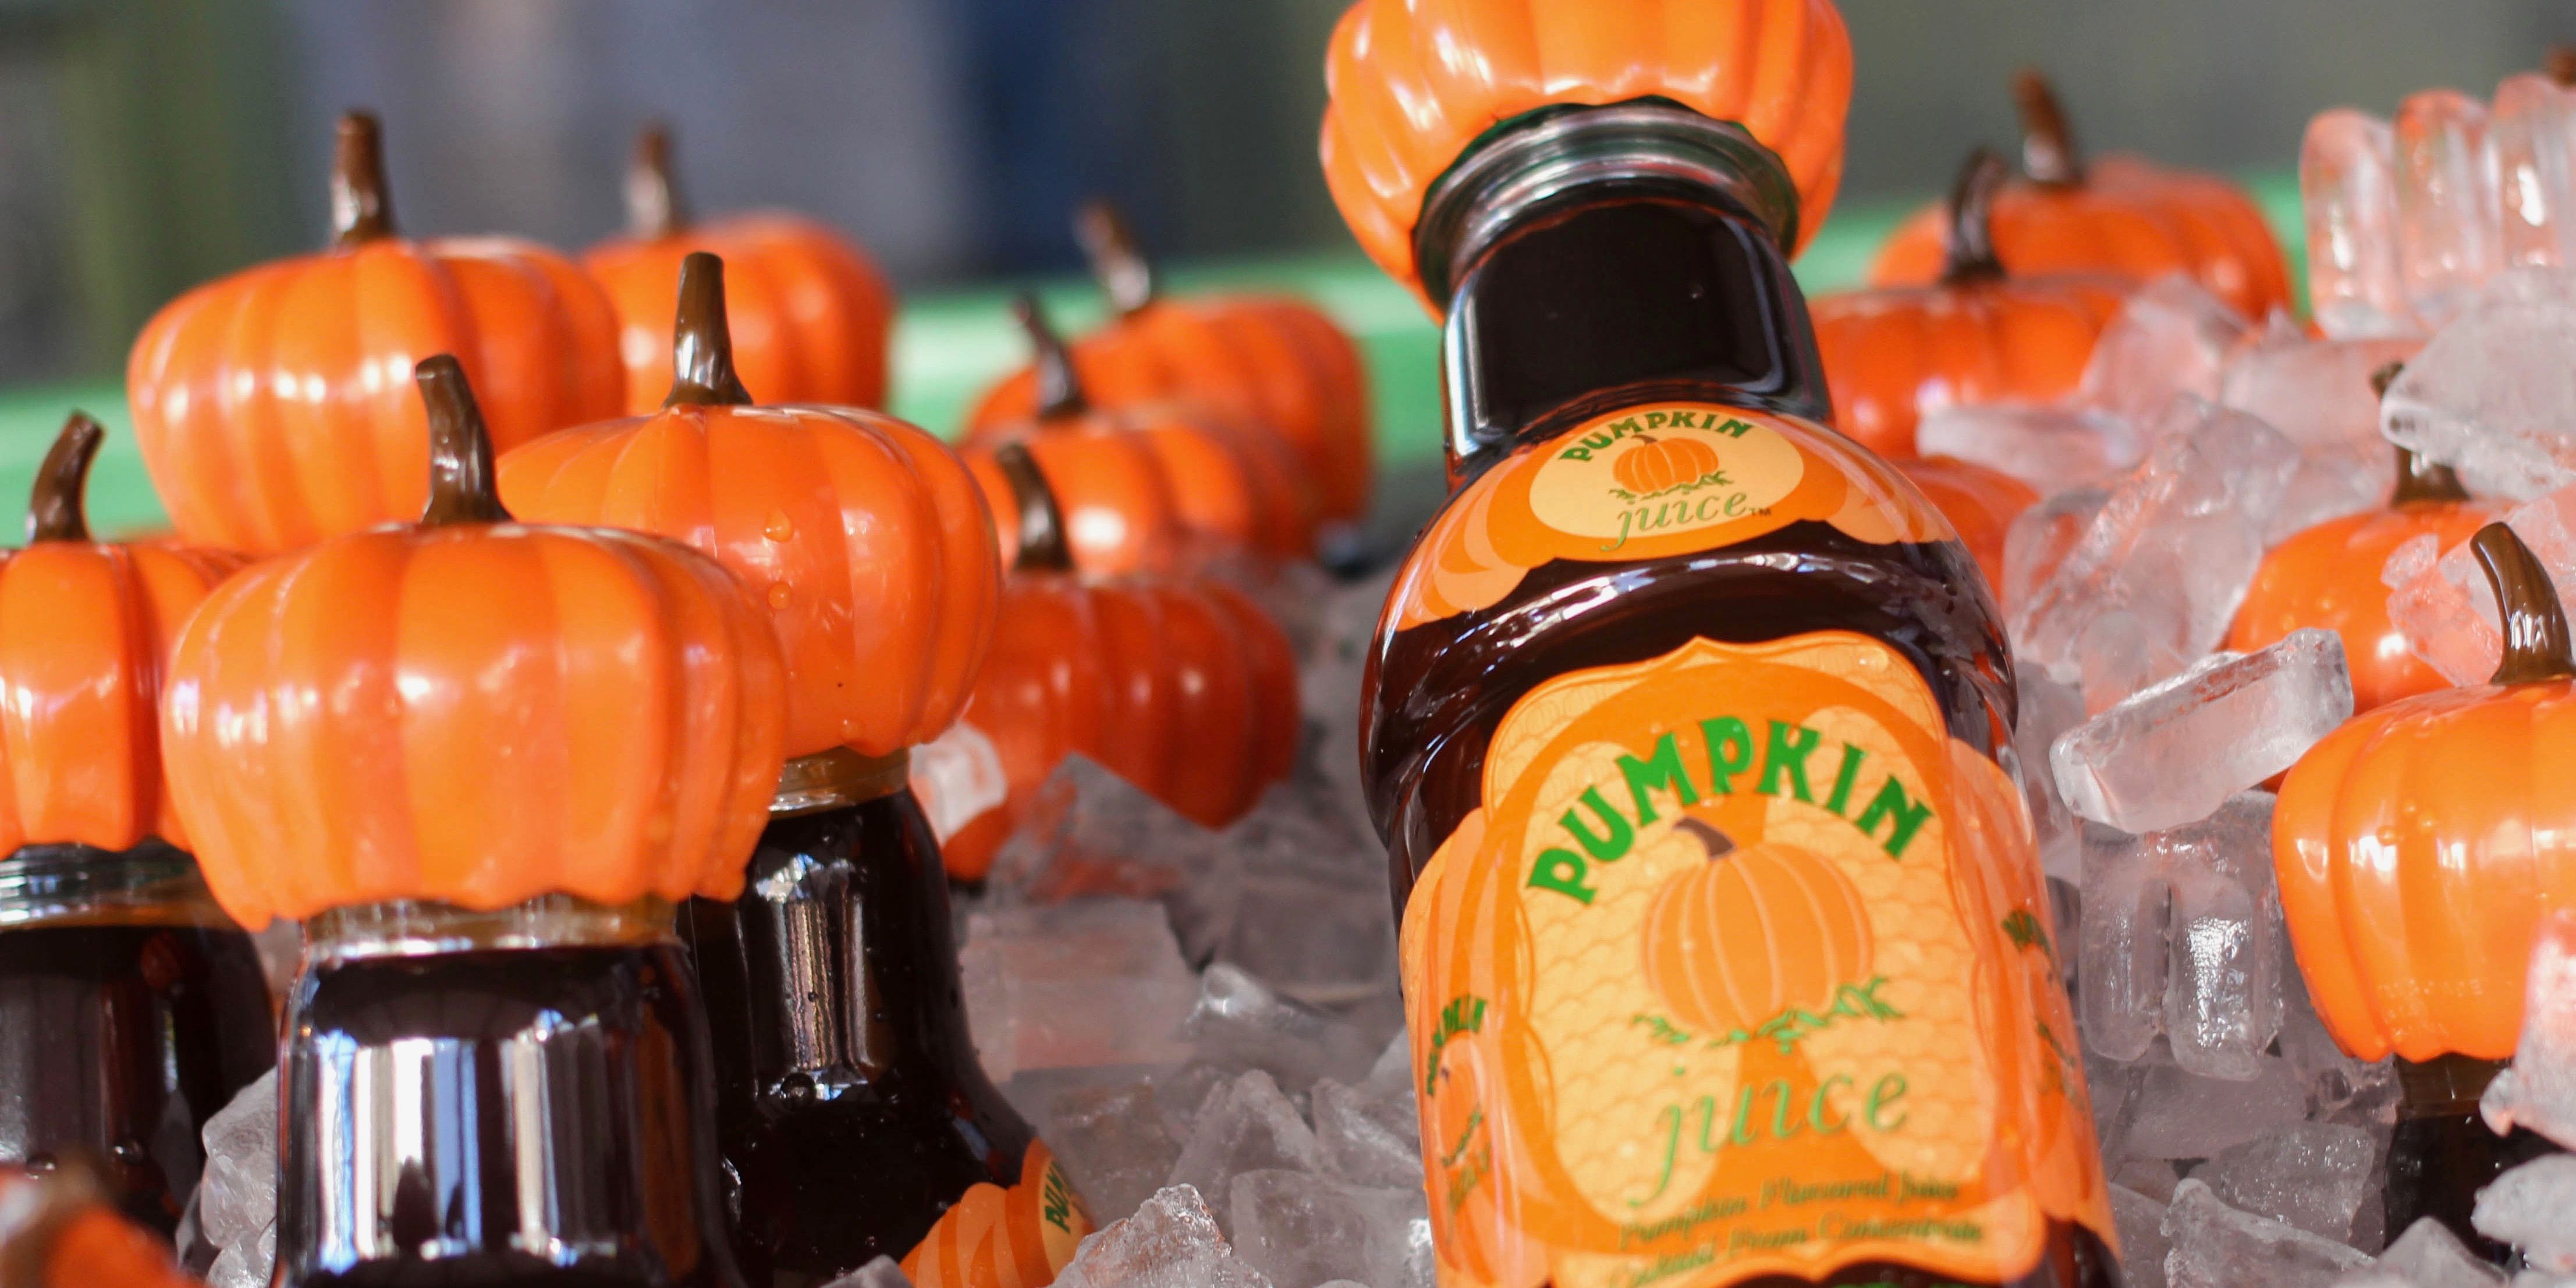 A collection of pumpkin juice bottles from Harry Potter